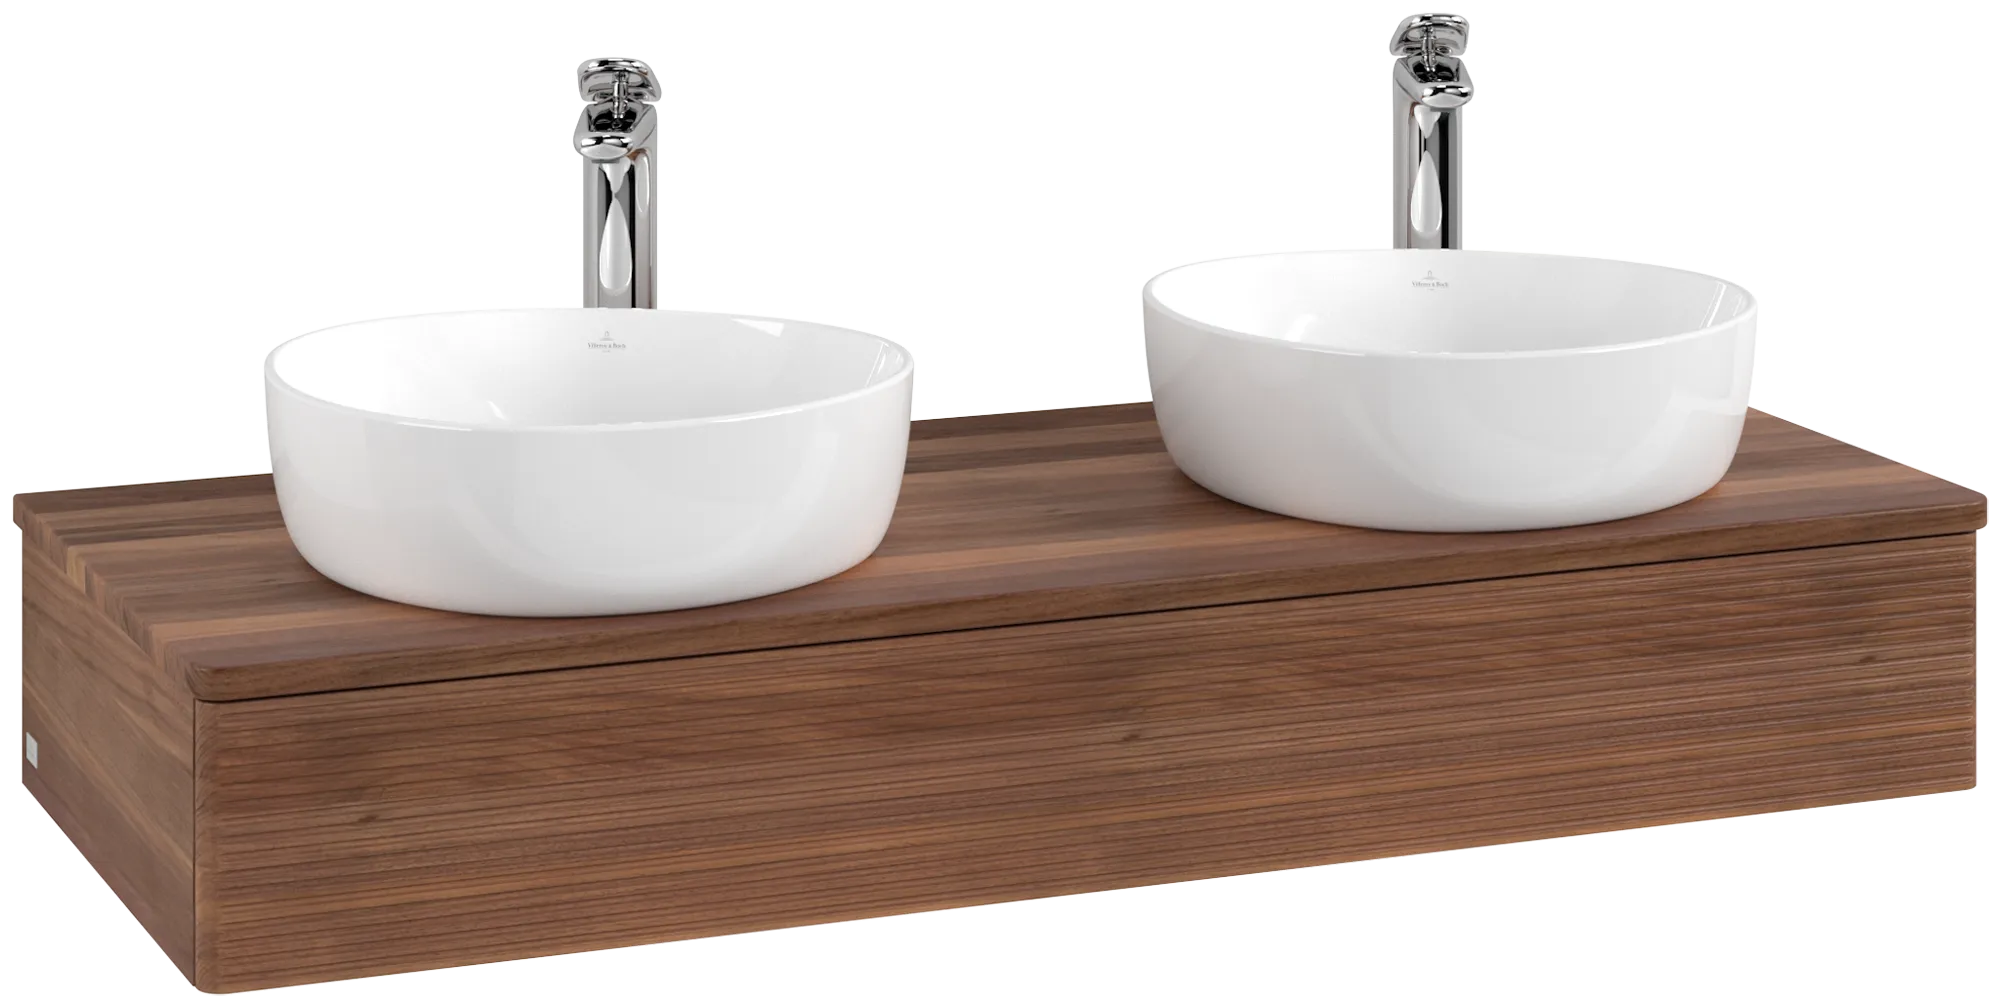 Picture of VILLEROY BOCH Antao Vanity unit, 1 pull-out compartment, 1200 x 190 x 500 mm, Front with grain texture, Warm Walnut / Warm Walnut #K13152HM